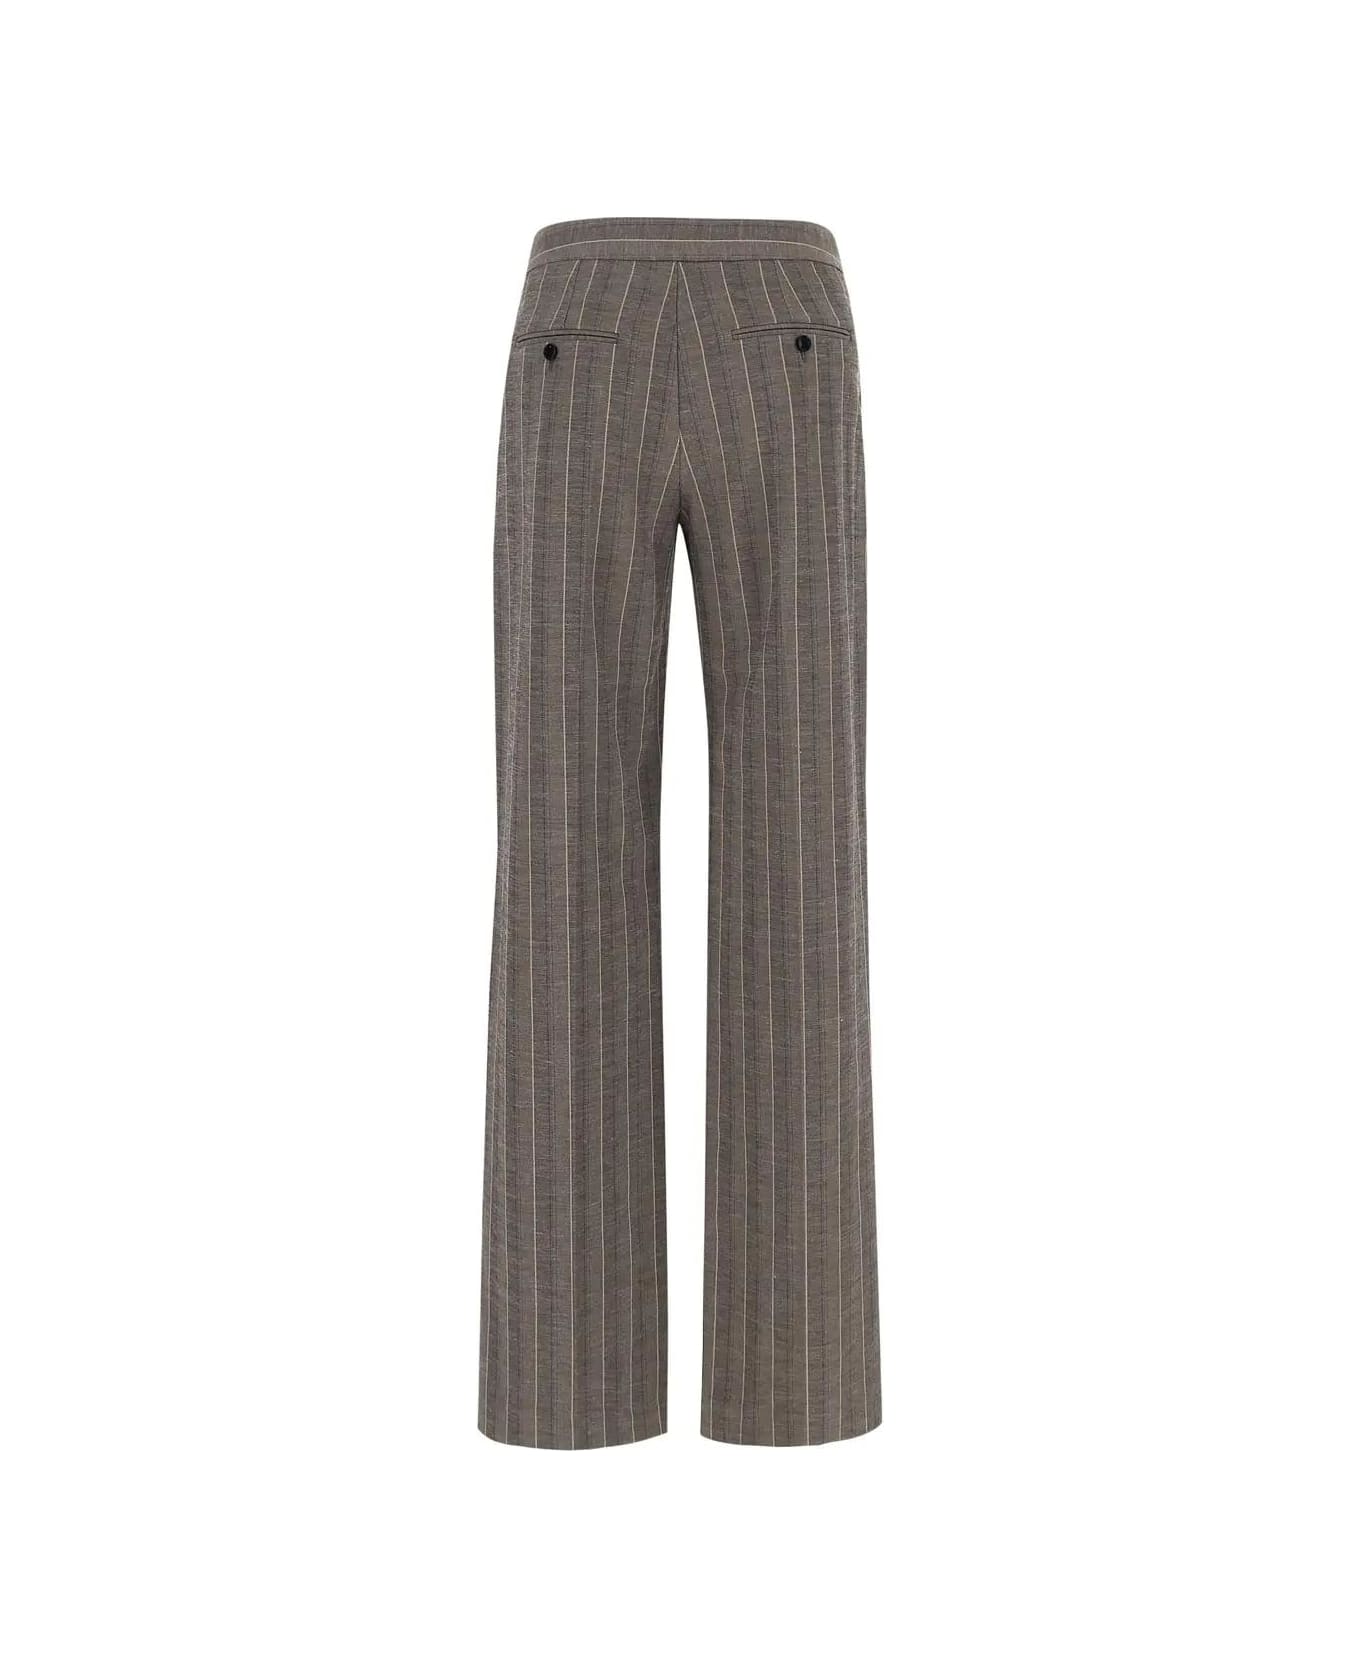 Isabel Marant Scarly Trousers - Gy Grey ボトムス